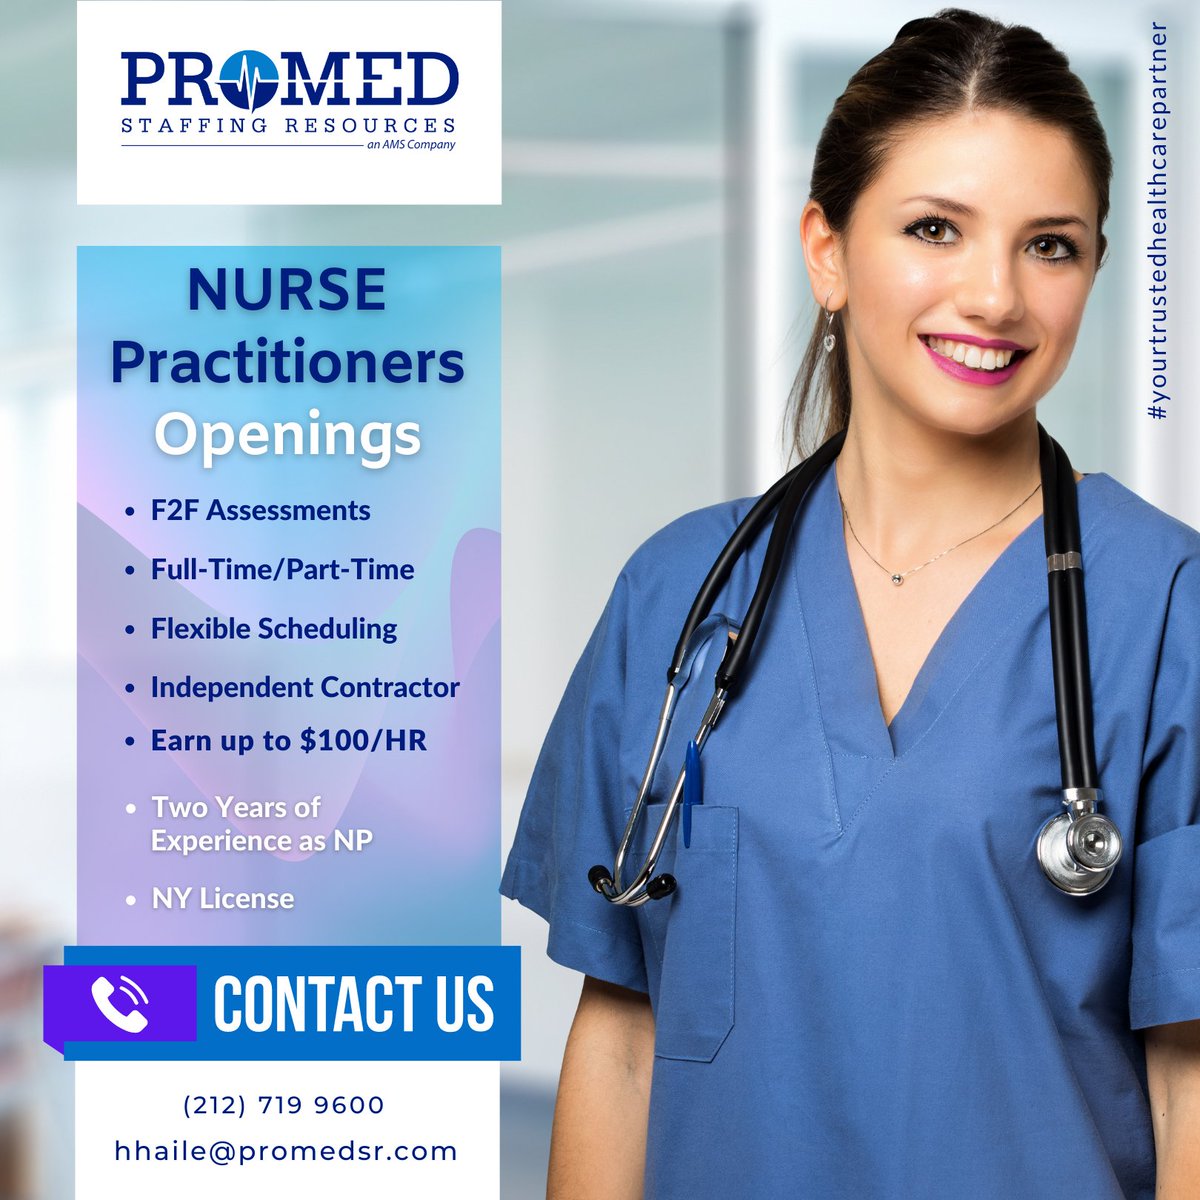 #nursepractitioners, this once in a lifetime opportunity awaits you! Contact Hemeden Haile via email at hhaile@promedsr.com 

#promedsr #nursepractitionerjobs #nursepractitionersinyc #newyorknursepractitioners #practitionerorder #newyorkjobs #hiringinewyork #employmentagency